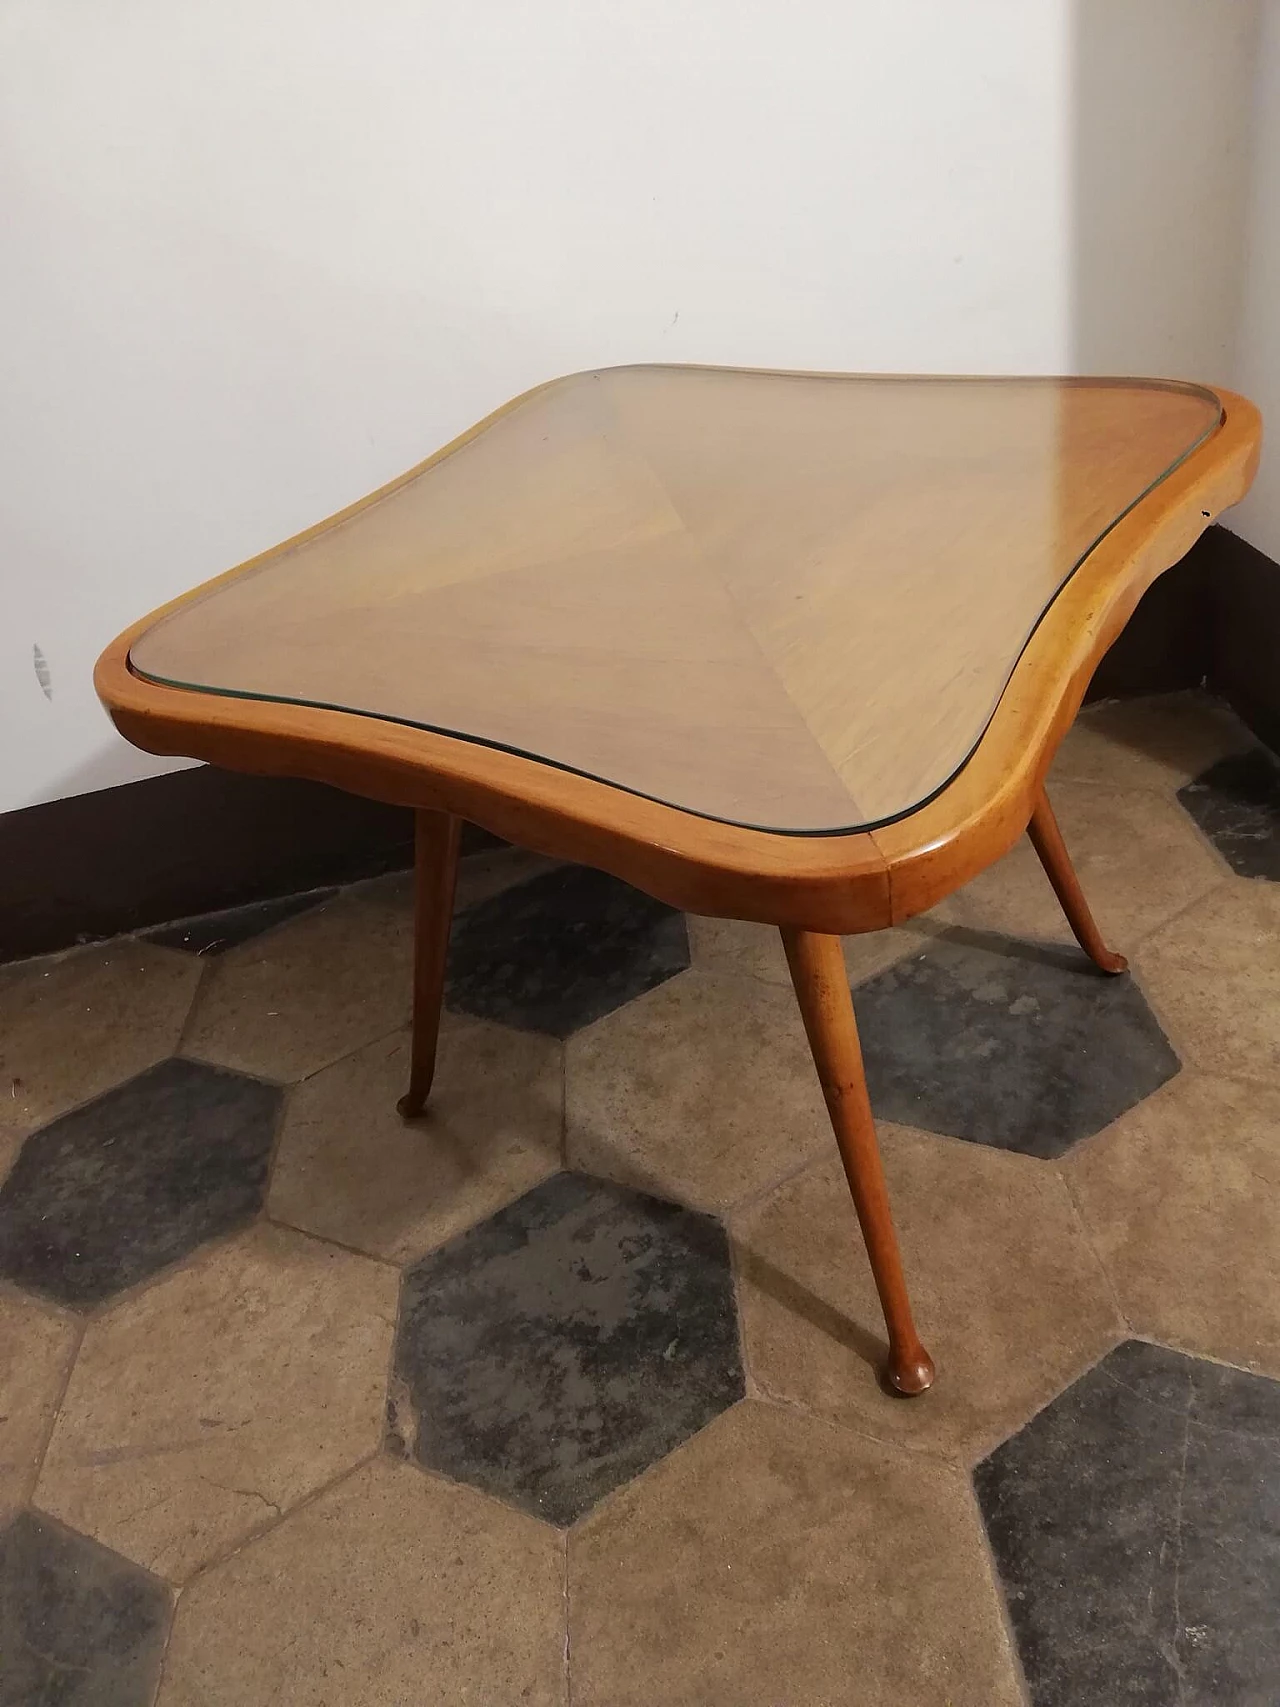 Wooden coffee table and glass top, 1950's 1083613